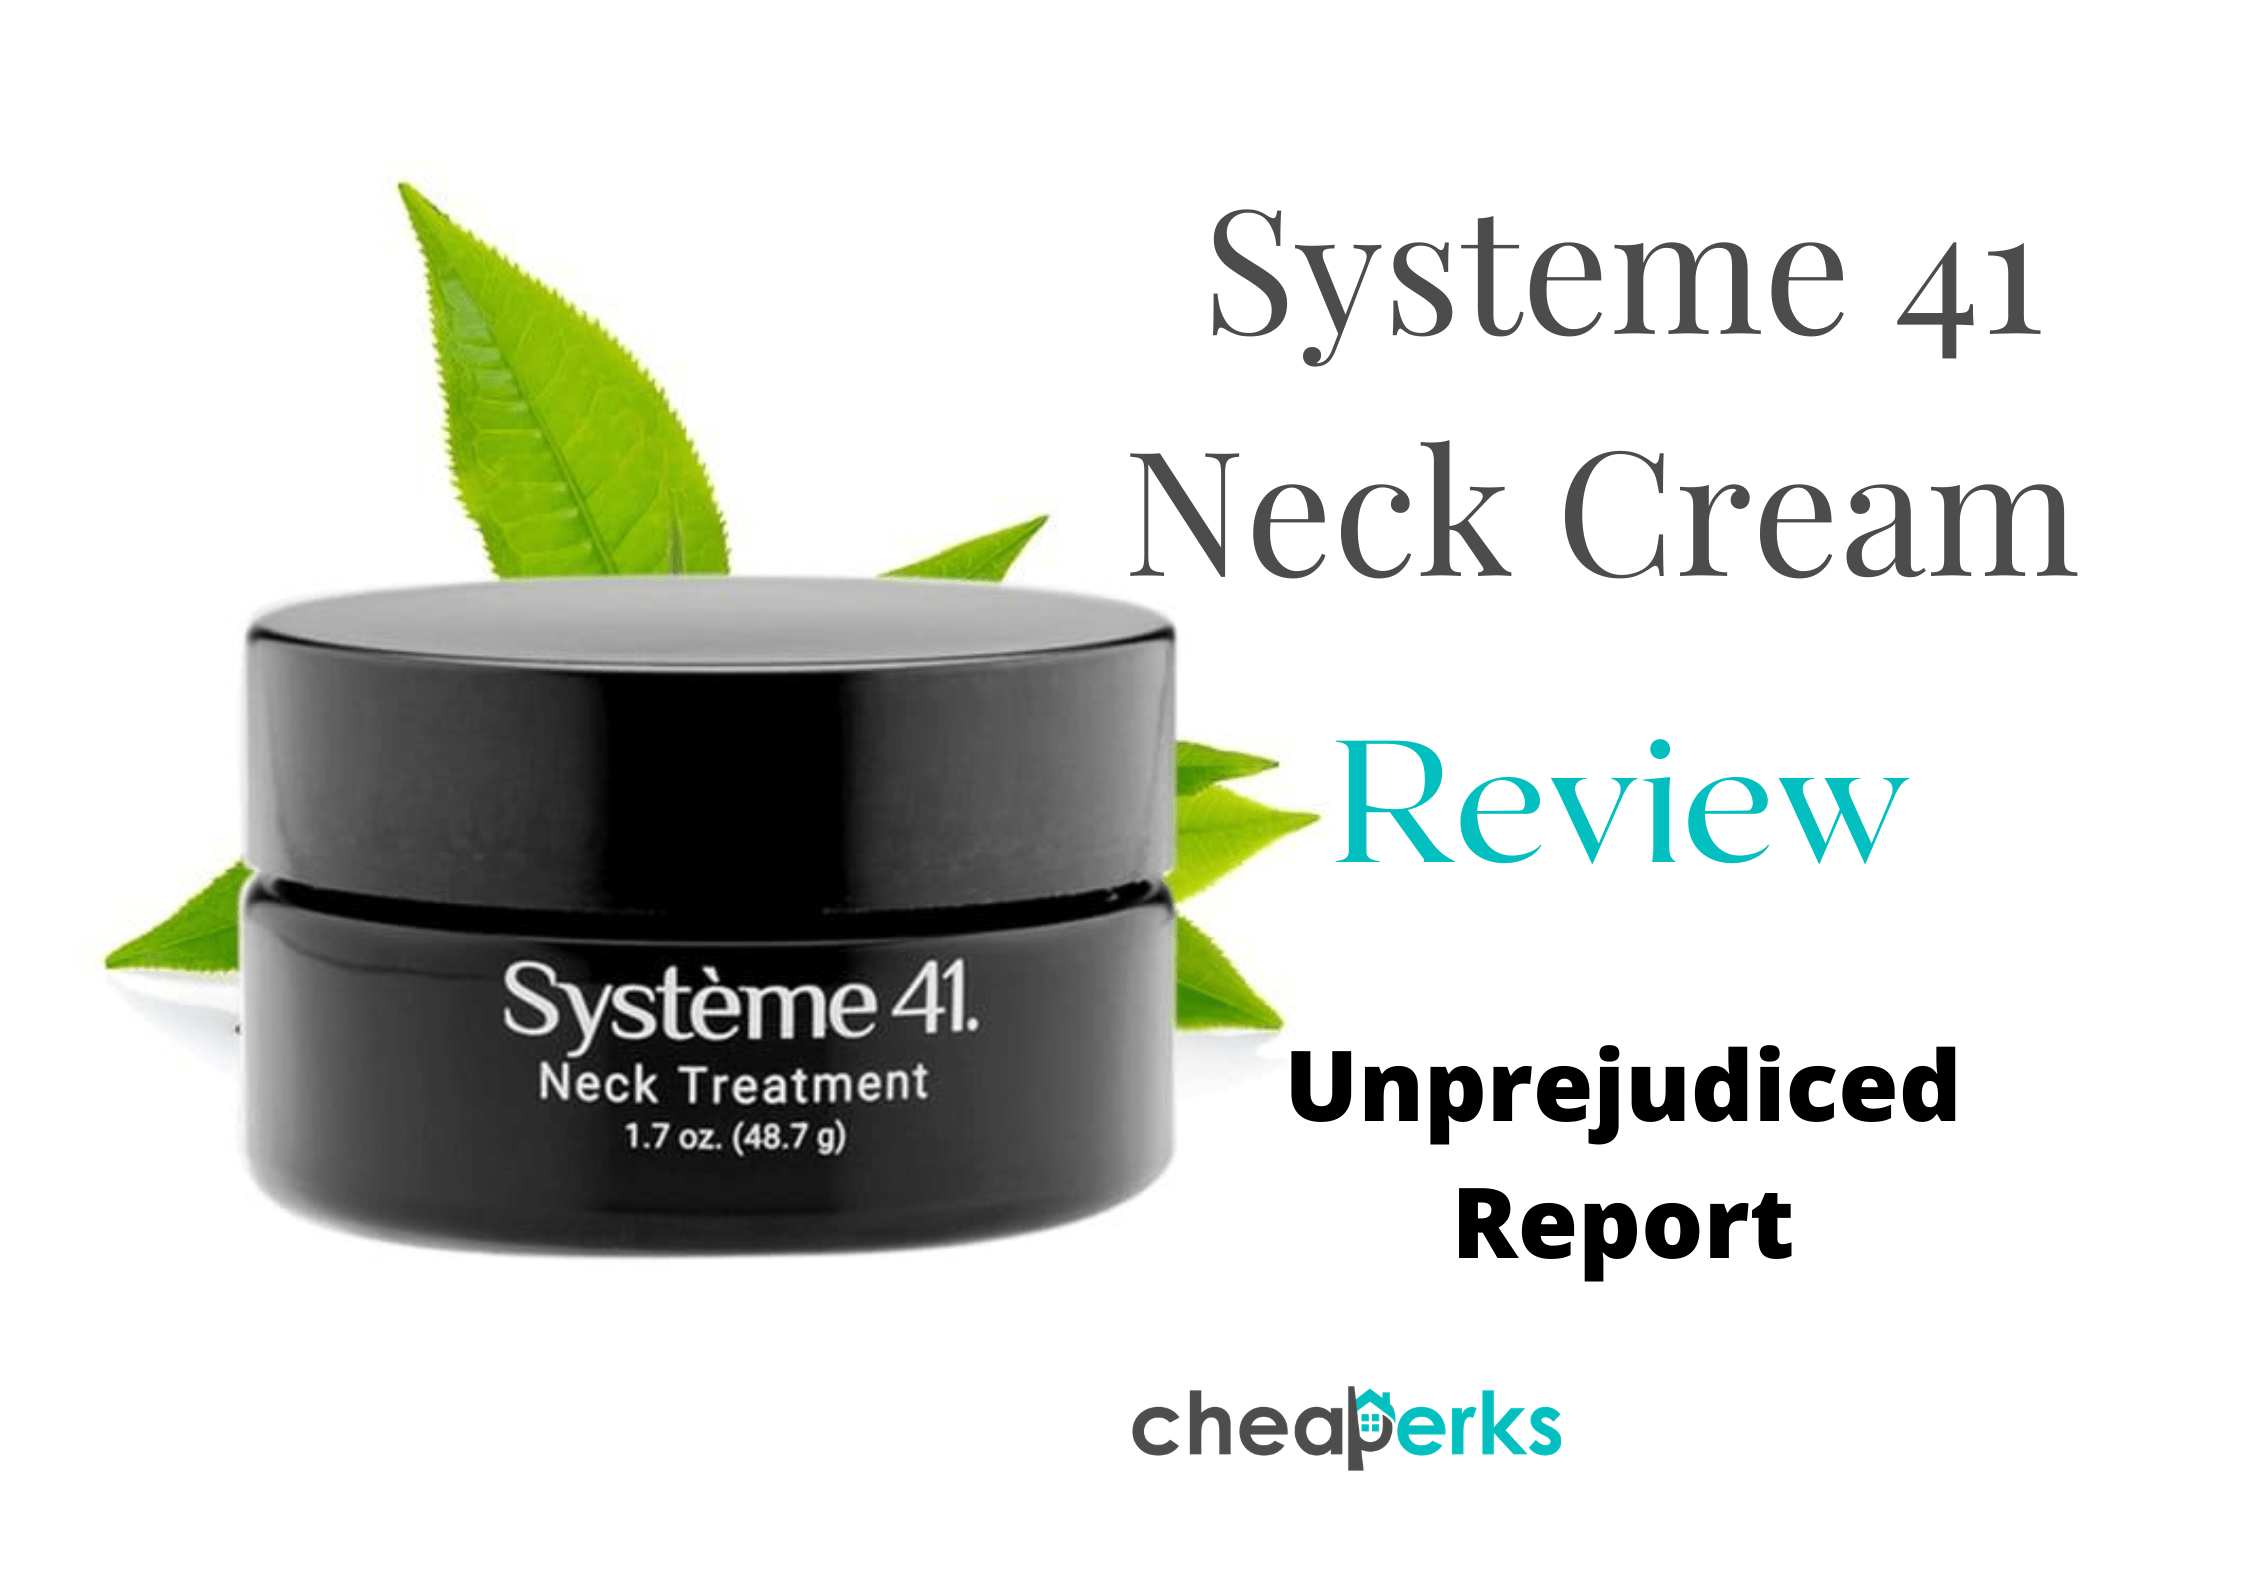 Systeme 41 Neck Cream Reviews | Is It Worth It? - Cheaperks